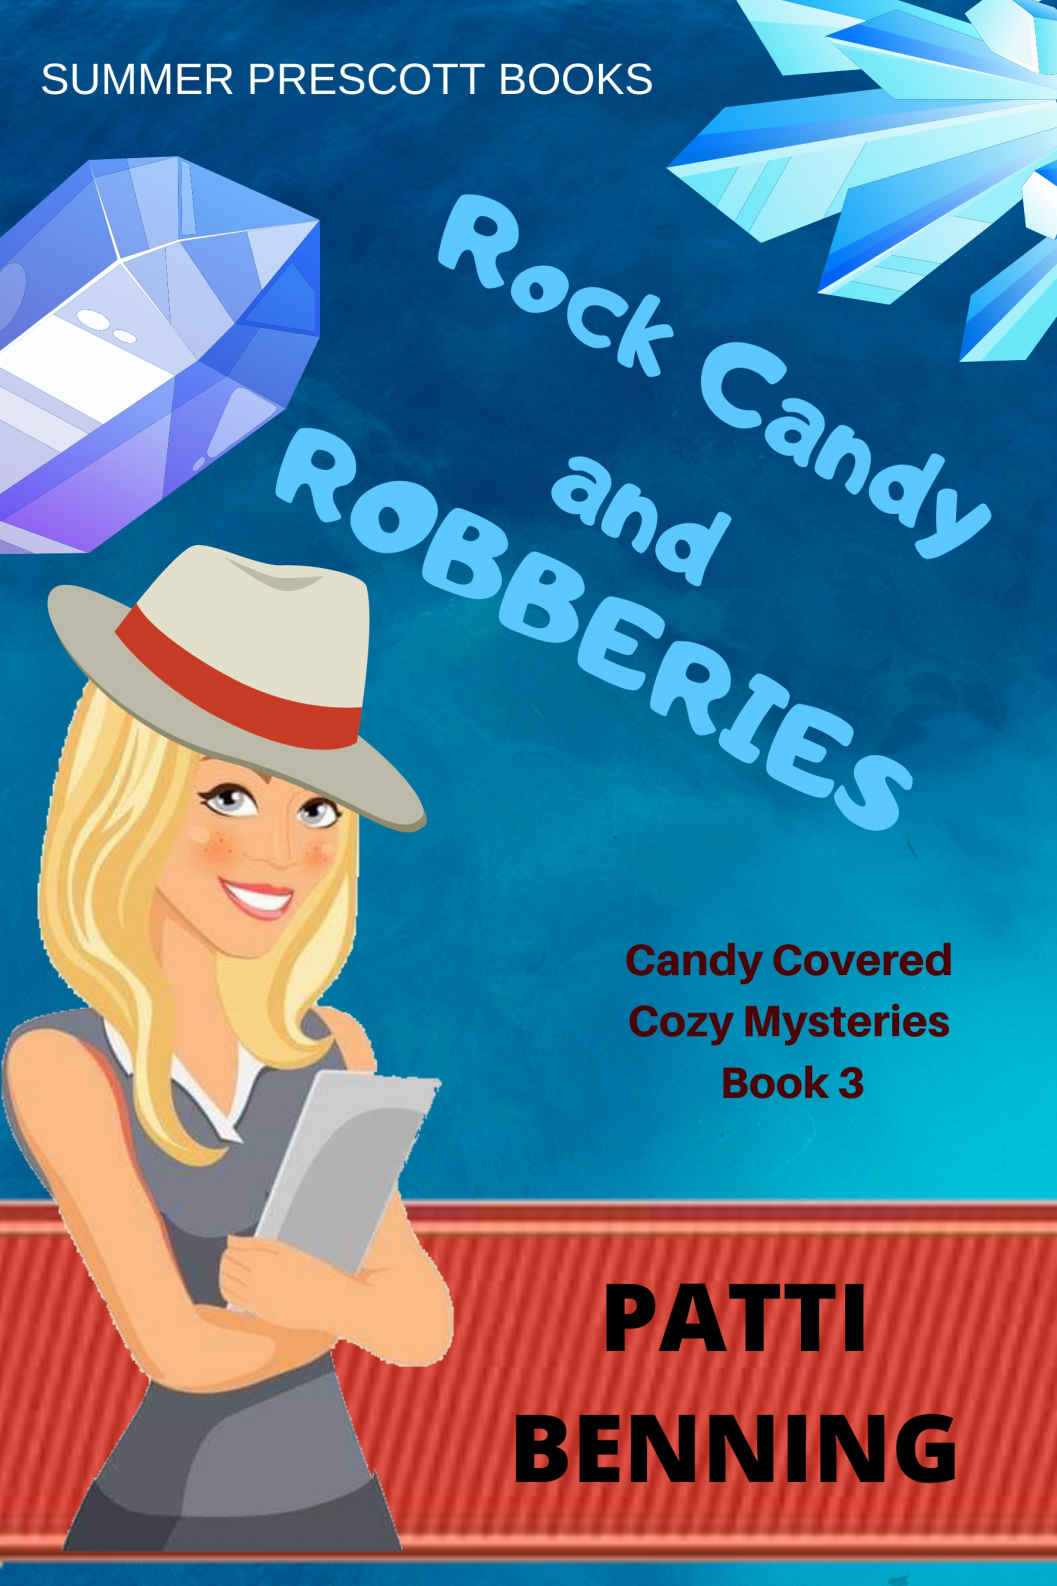 Rock Candy and Robberies